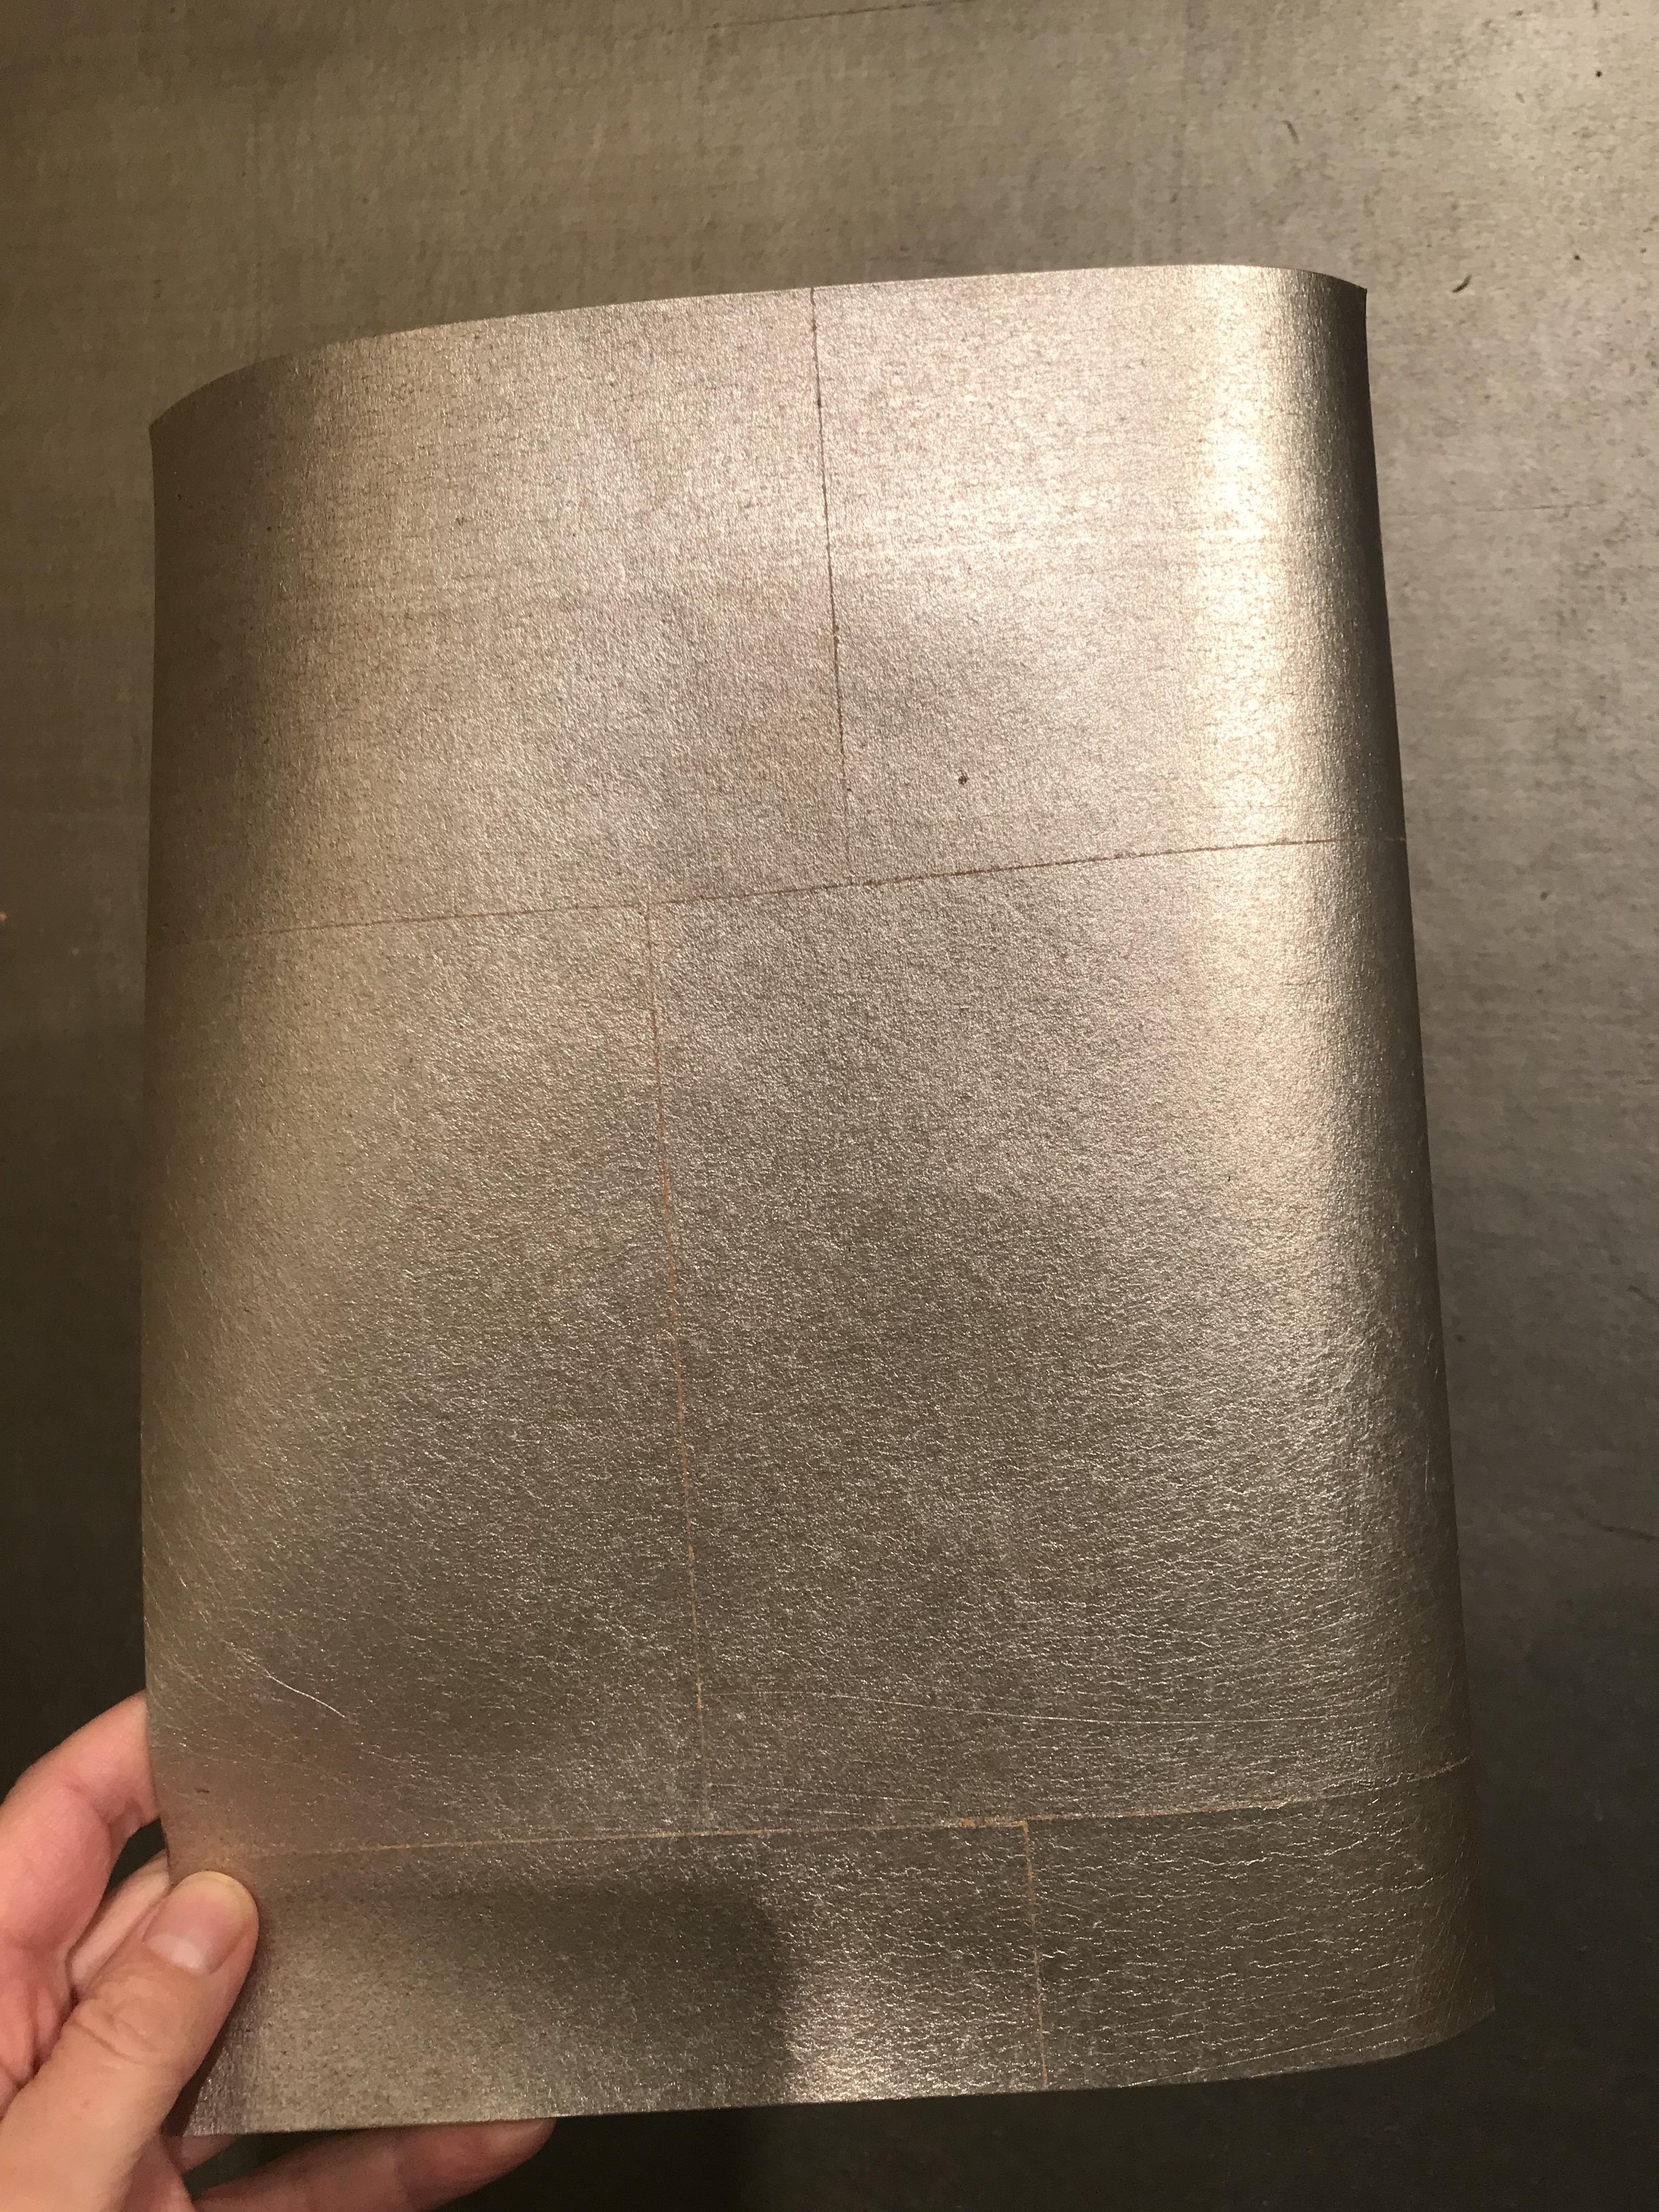 Gracie, established in 1898, makes this shimmering metal leaf paper by hand. The roll size is 3' by 24', and the metal leaf squares are slightly overlapped in a random pattern and measure about 5.5